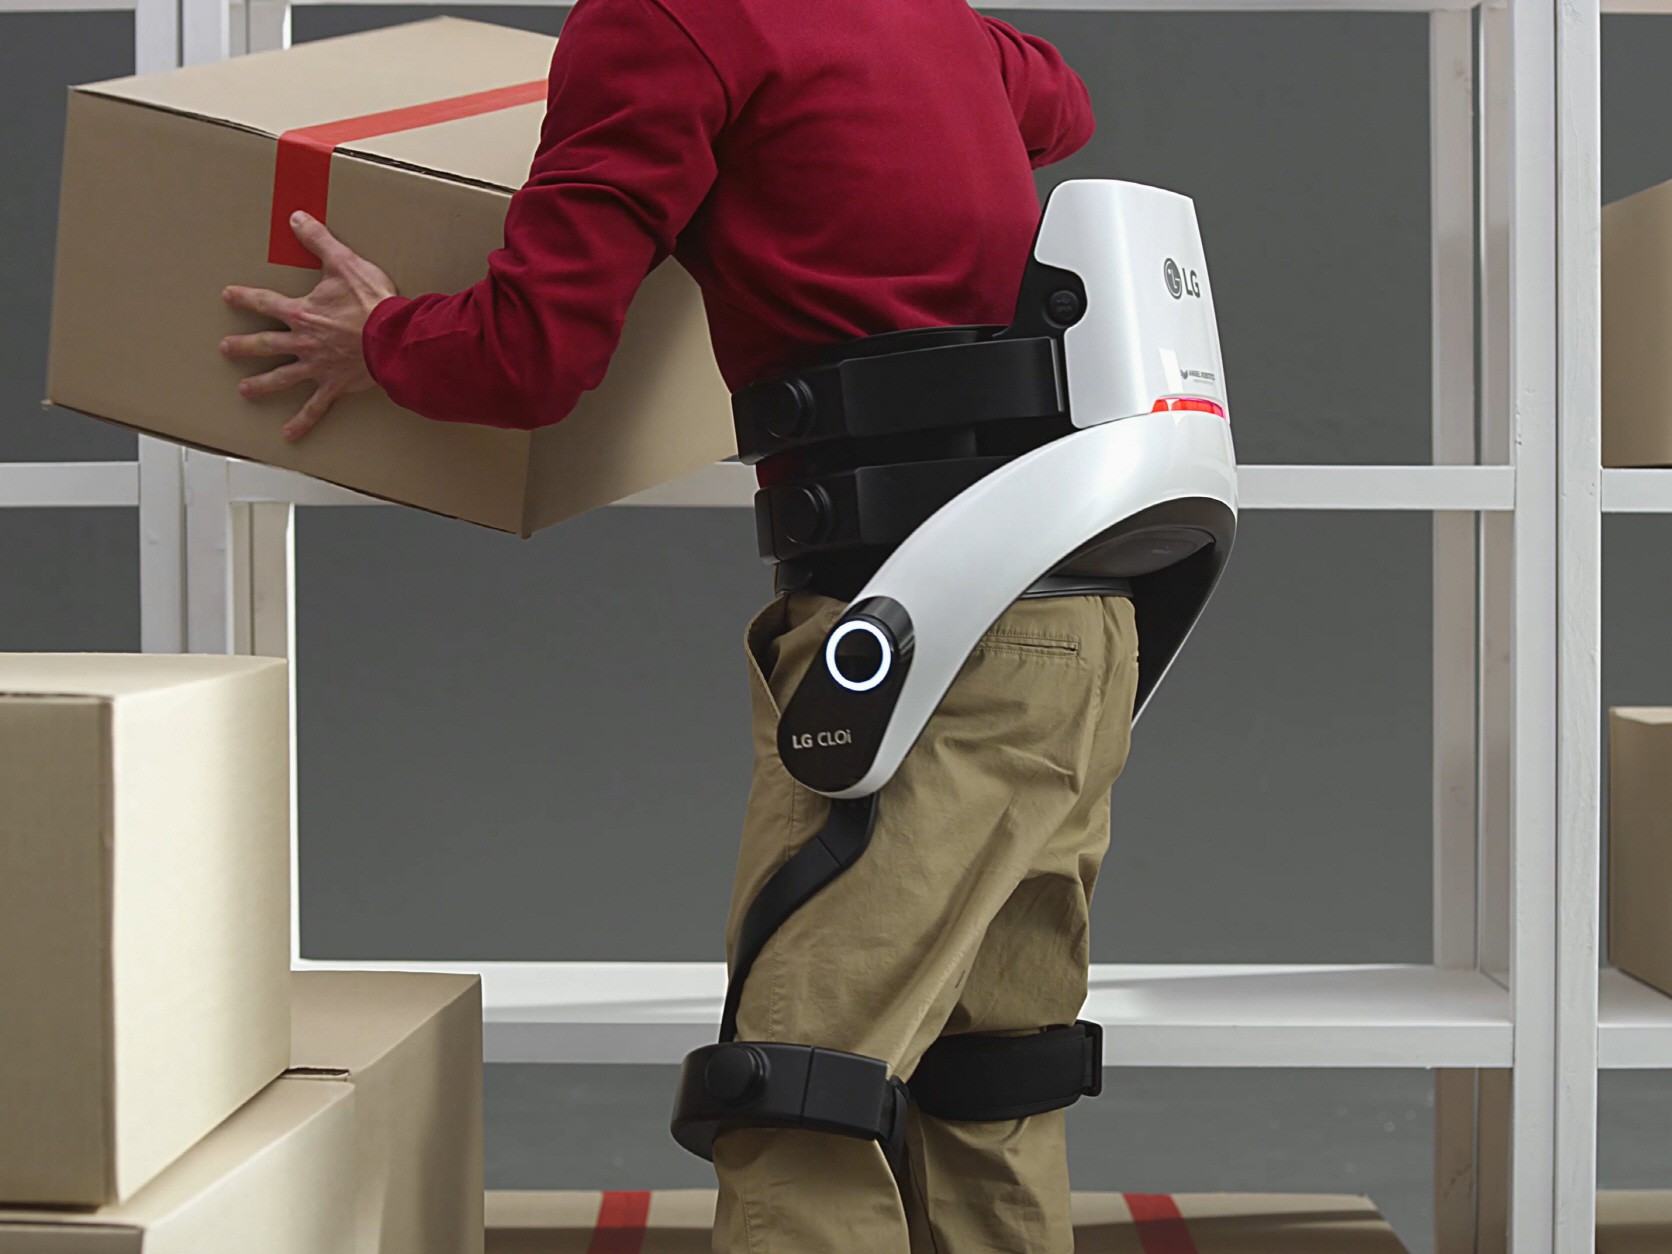 Close up of man lifting box while wearing the LG CLOi SuitBot